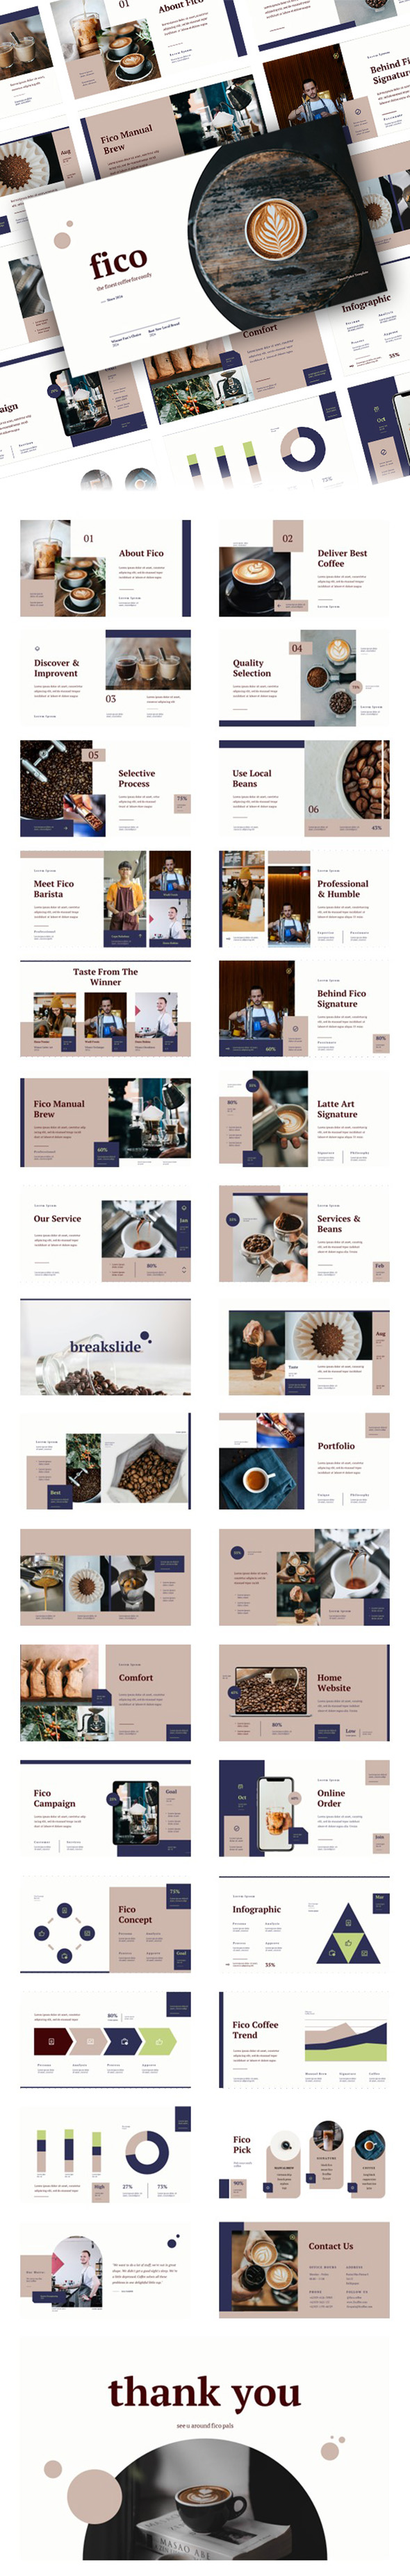 [DOWNLOAD]Fico - Cafe Powerpoint Template